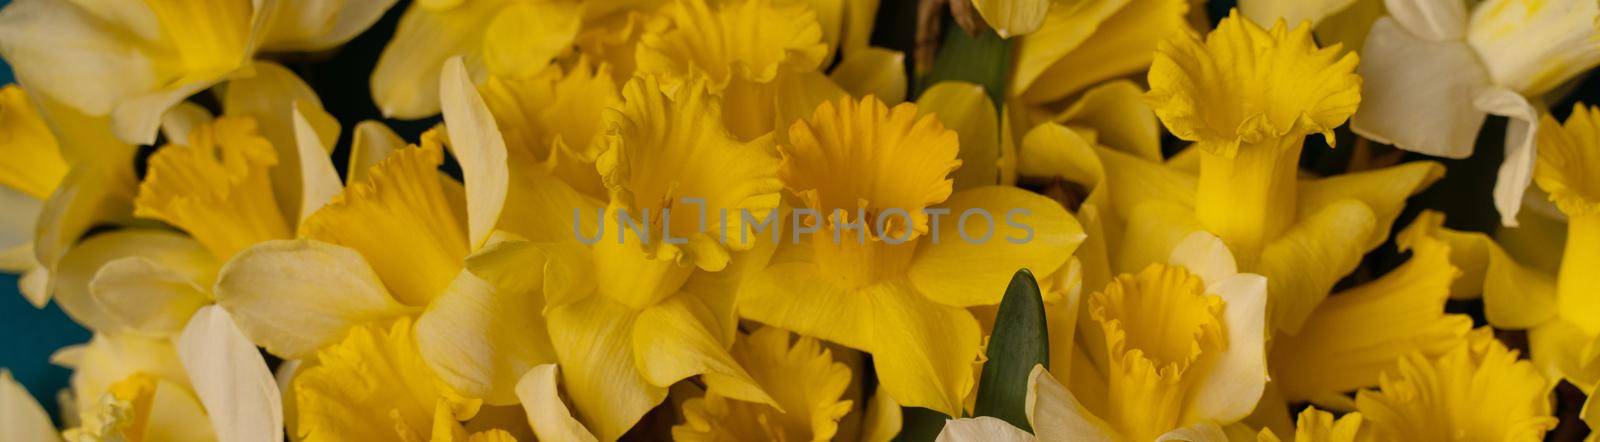 Romantic banner, delicate yellow daffodils flowers close-up. Full size. blossom